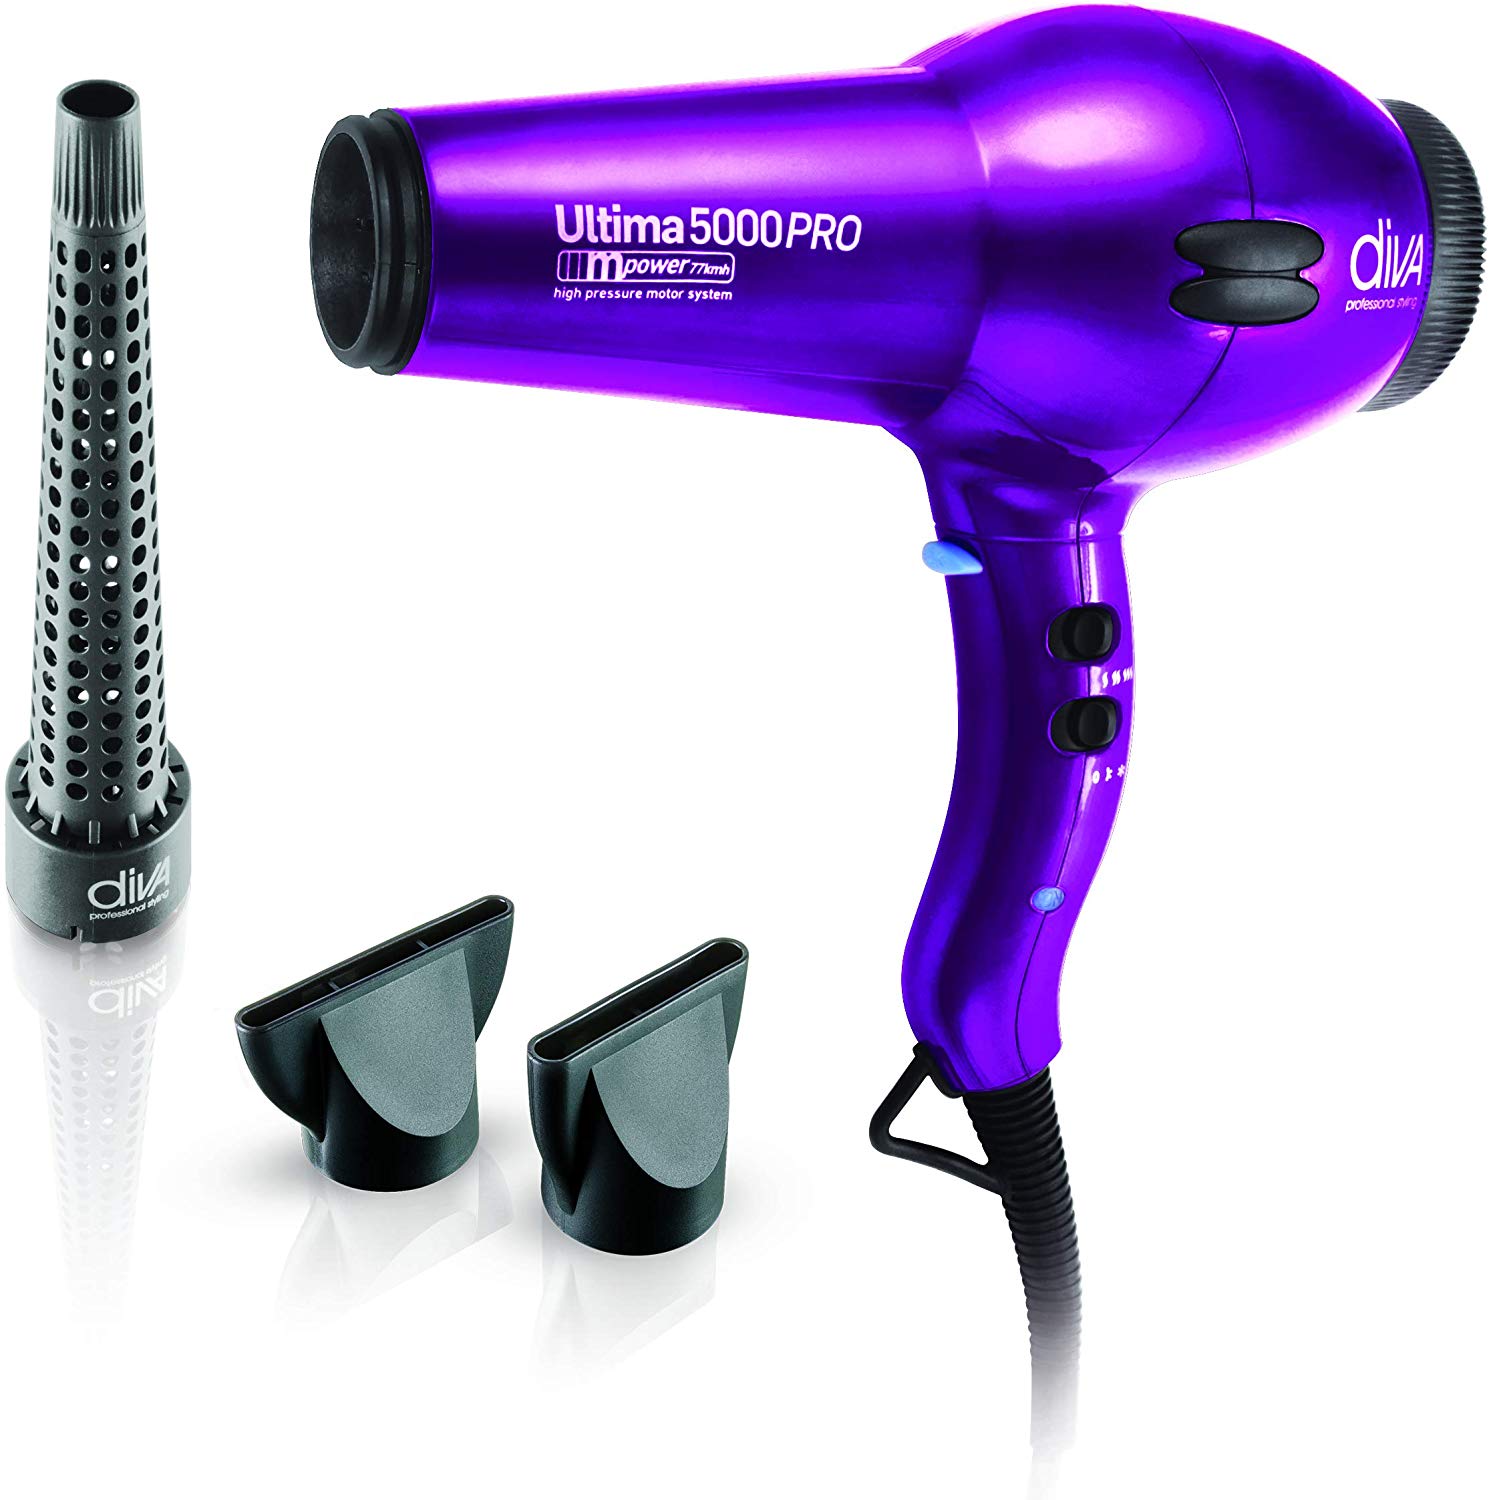 Diva Hair Dryers with Reviews and Compared - ehaircare